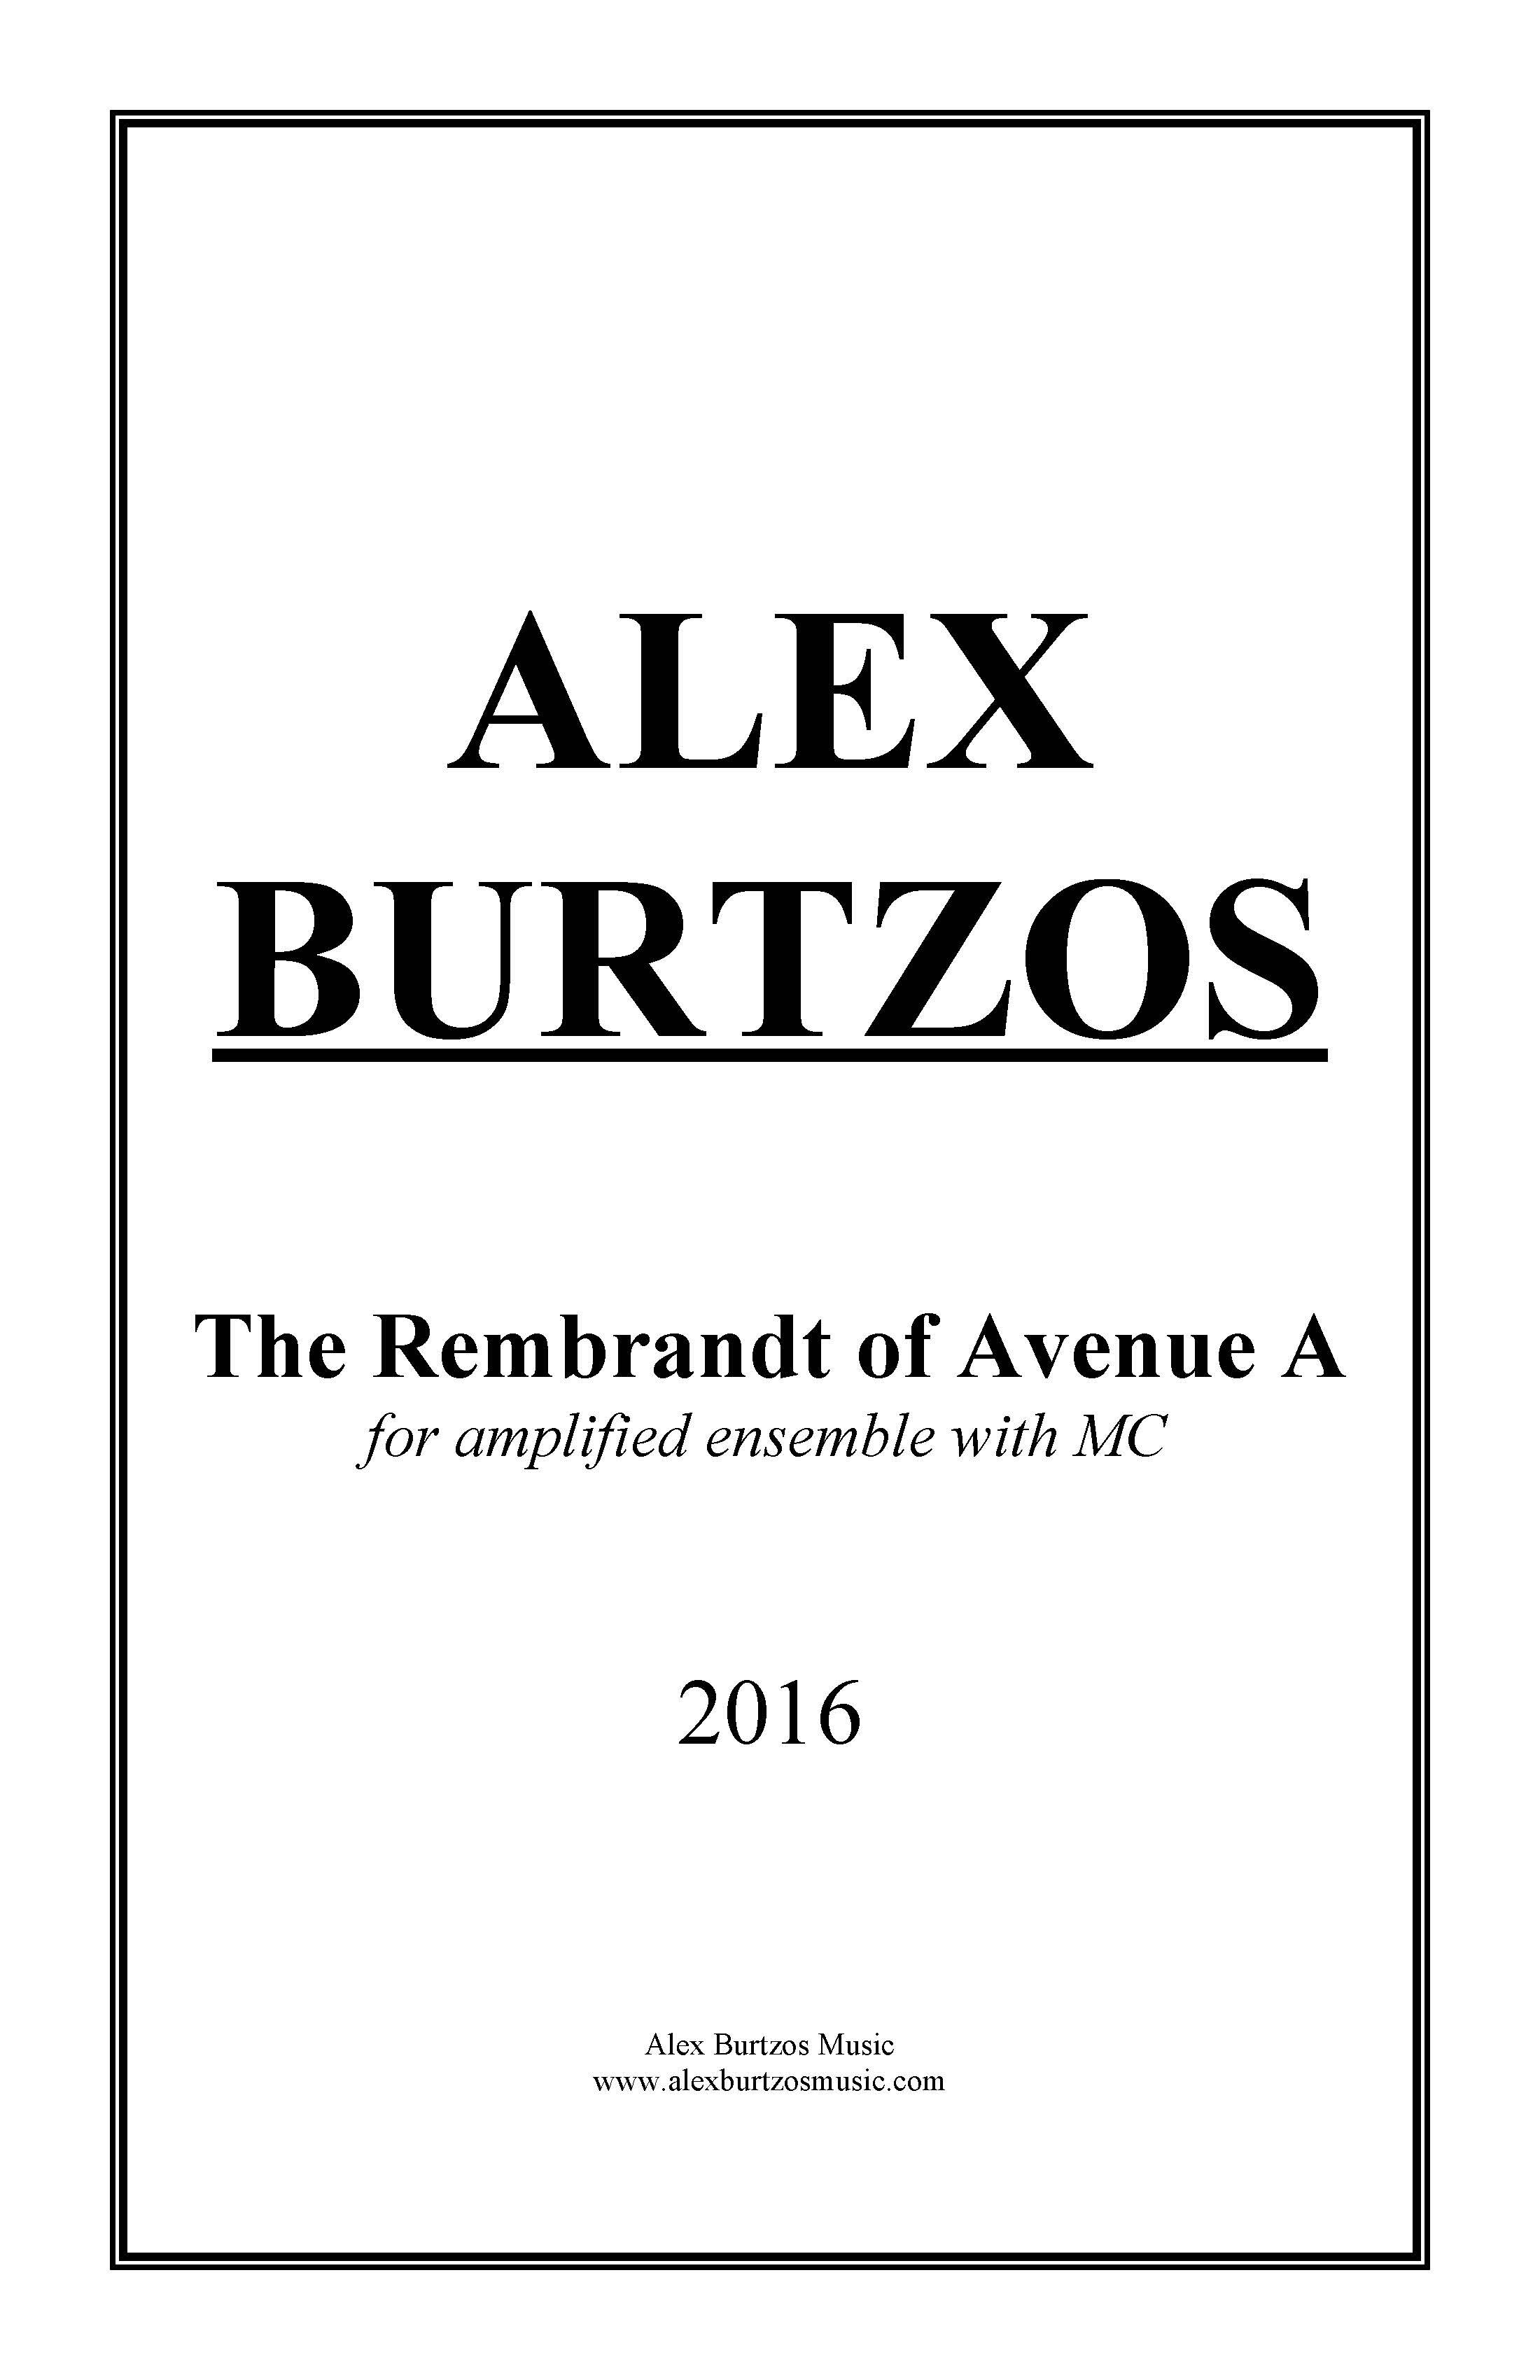 The Rembrandt of Avenue A - Complete Score_Page_01.jpg